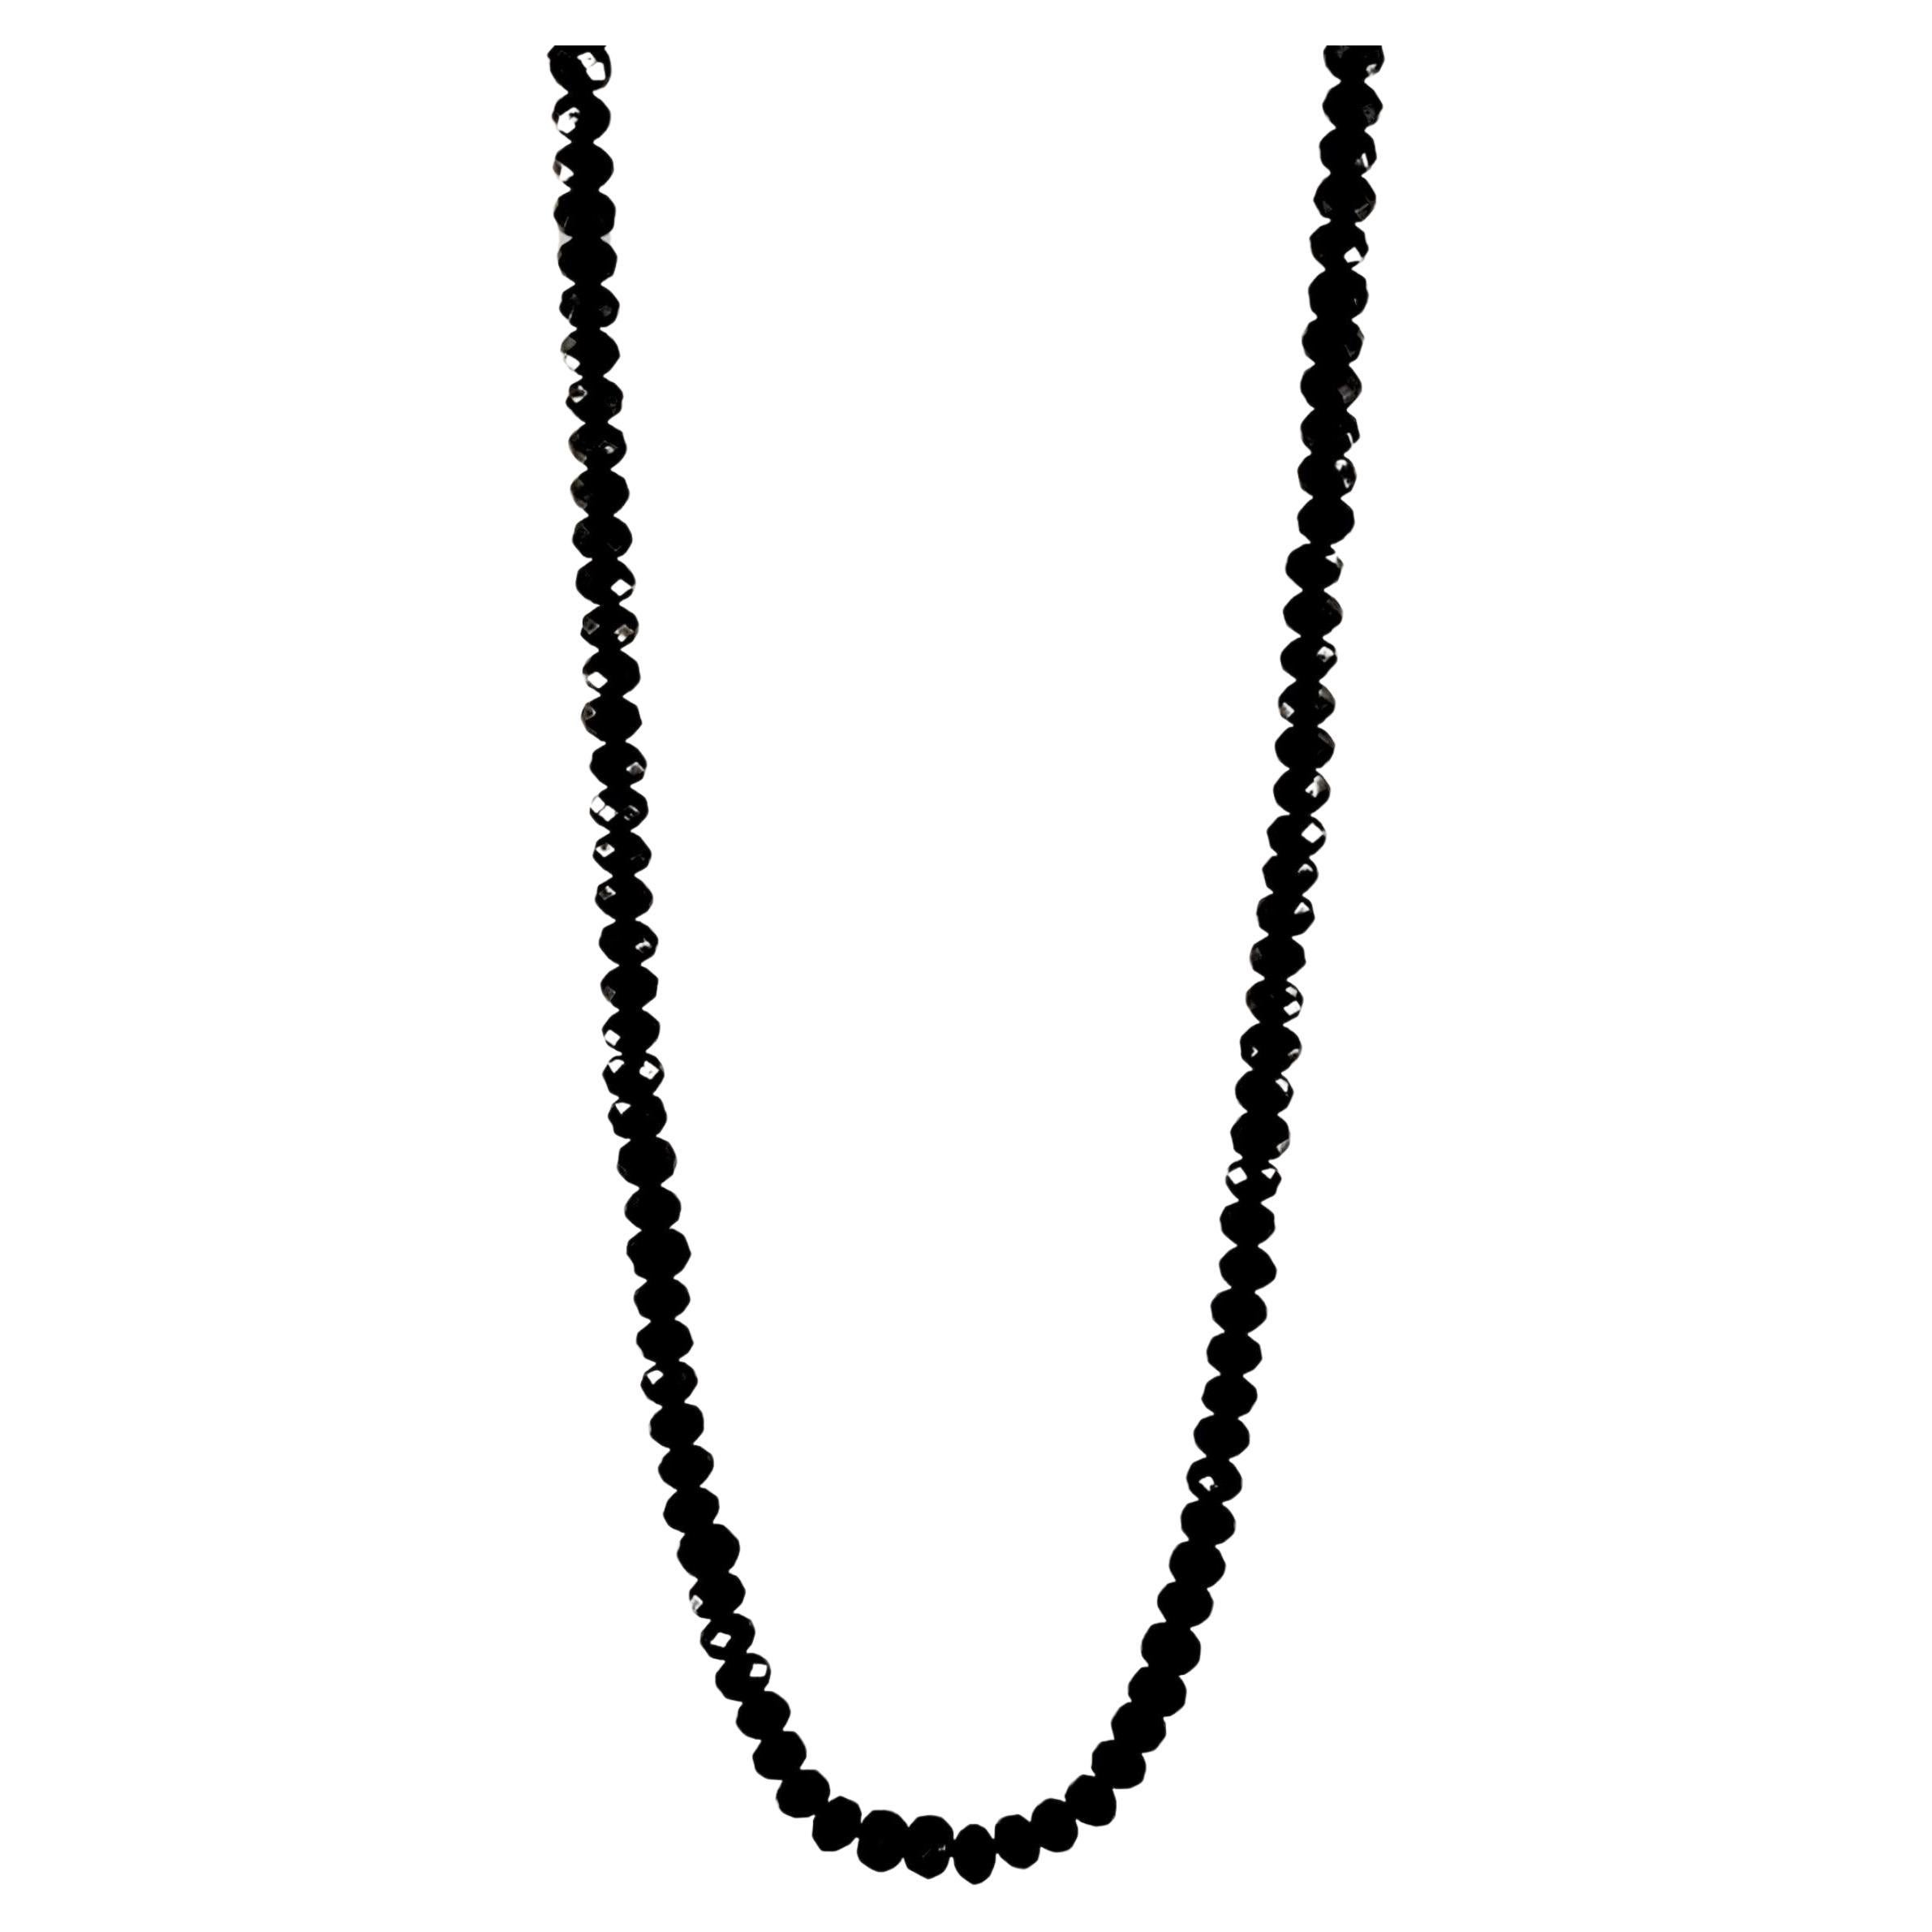 Brand David Yurman  
Black Spinal Necklace 
Necklace Beads  5mm
Spiritual beaded Necklace 
Material Sterling Silver 
Metal Purity 925
Necklace  Length 26'' From end to end 
Necklace Weight 34.6 
Condition New, never worn 
Comes with David Yurman